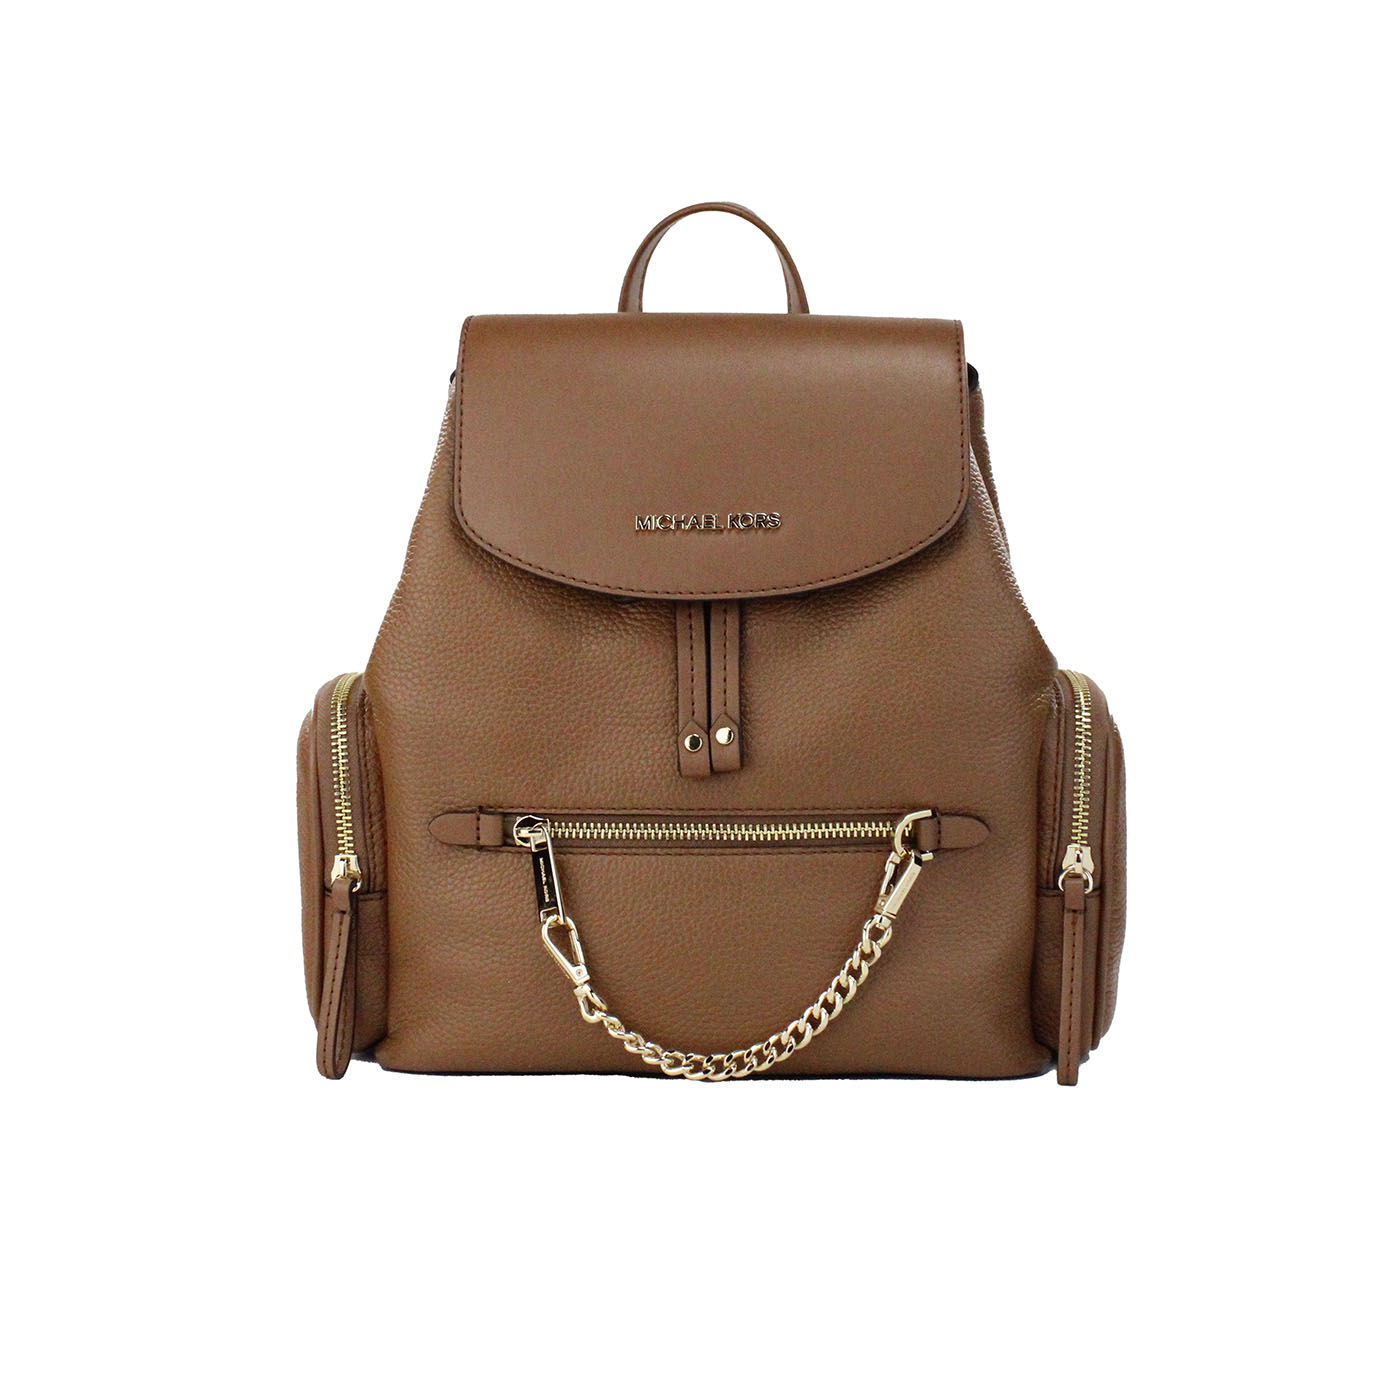 Jet Set Medium Luggage Leather Chain Shoulder Backpack Bag BY Michael Kors - Backpacks available at DOYUF